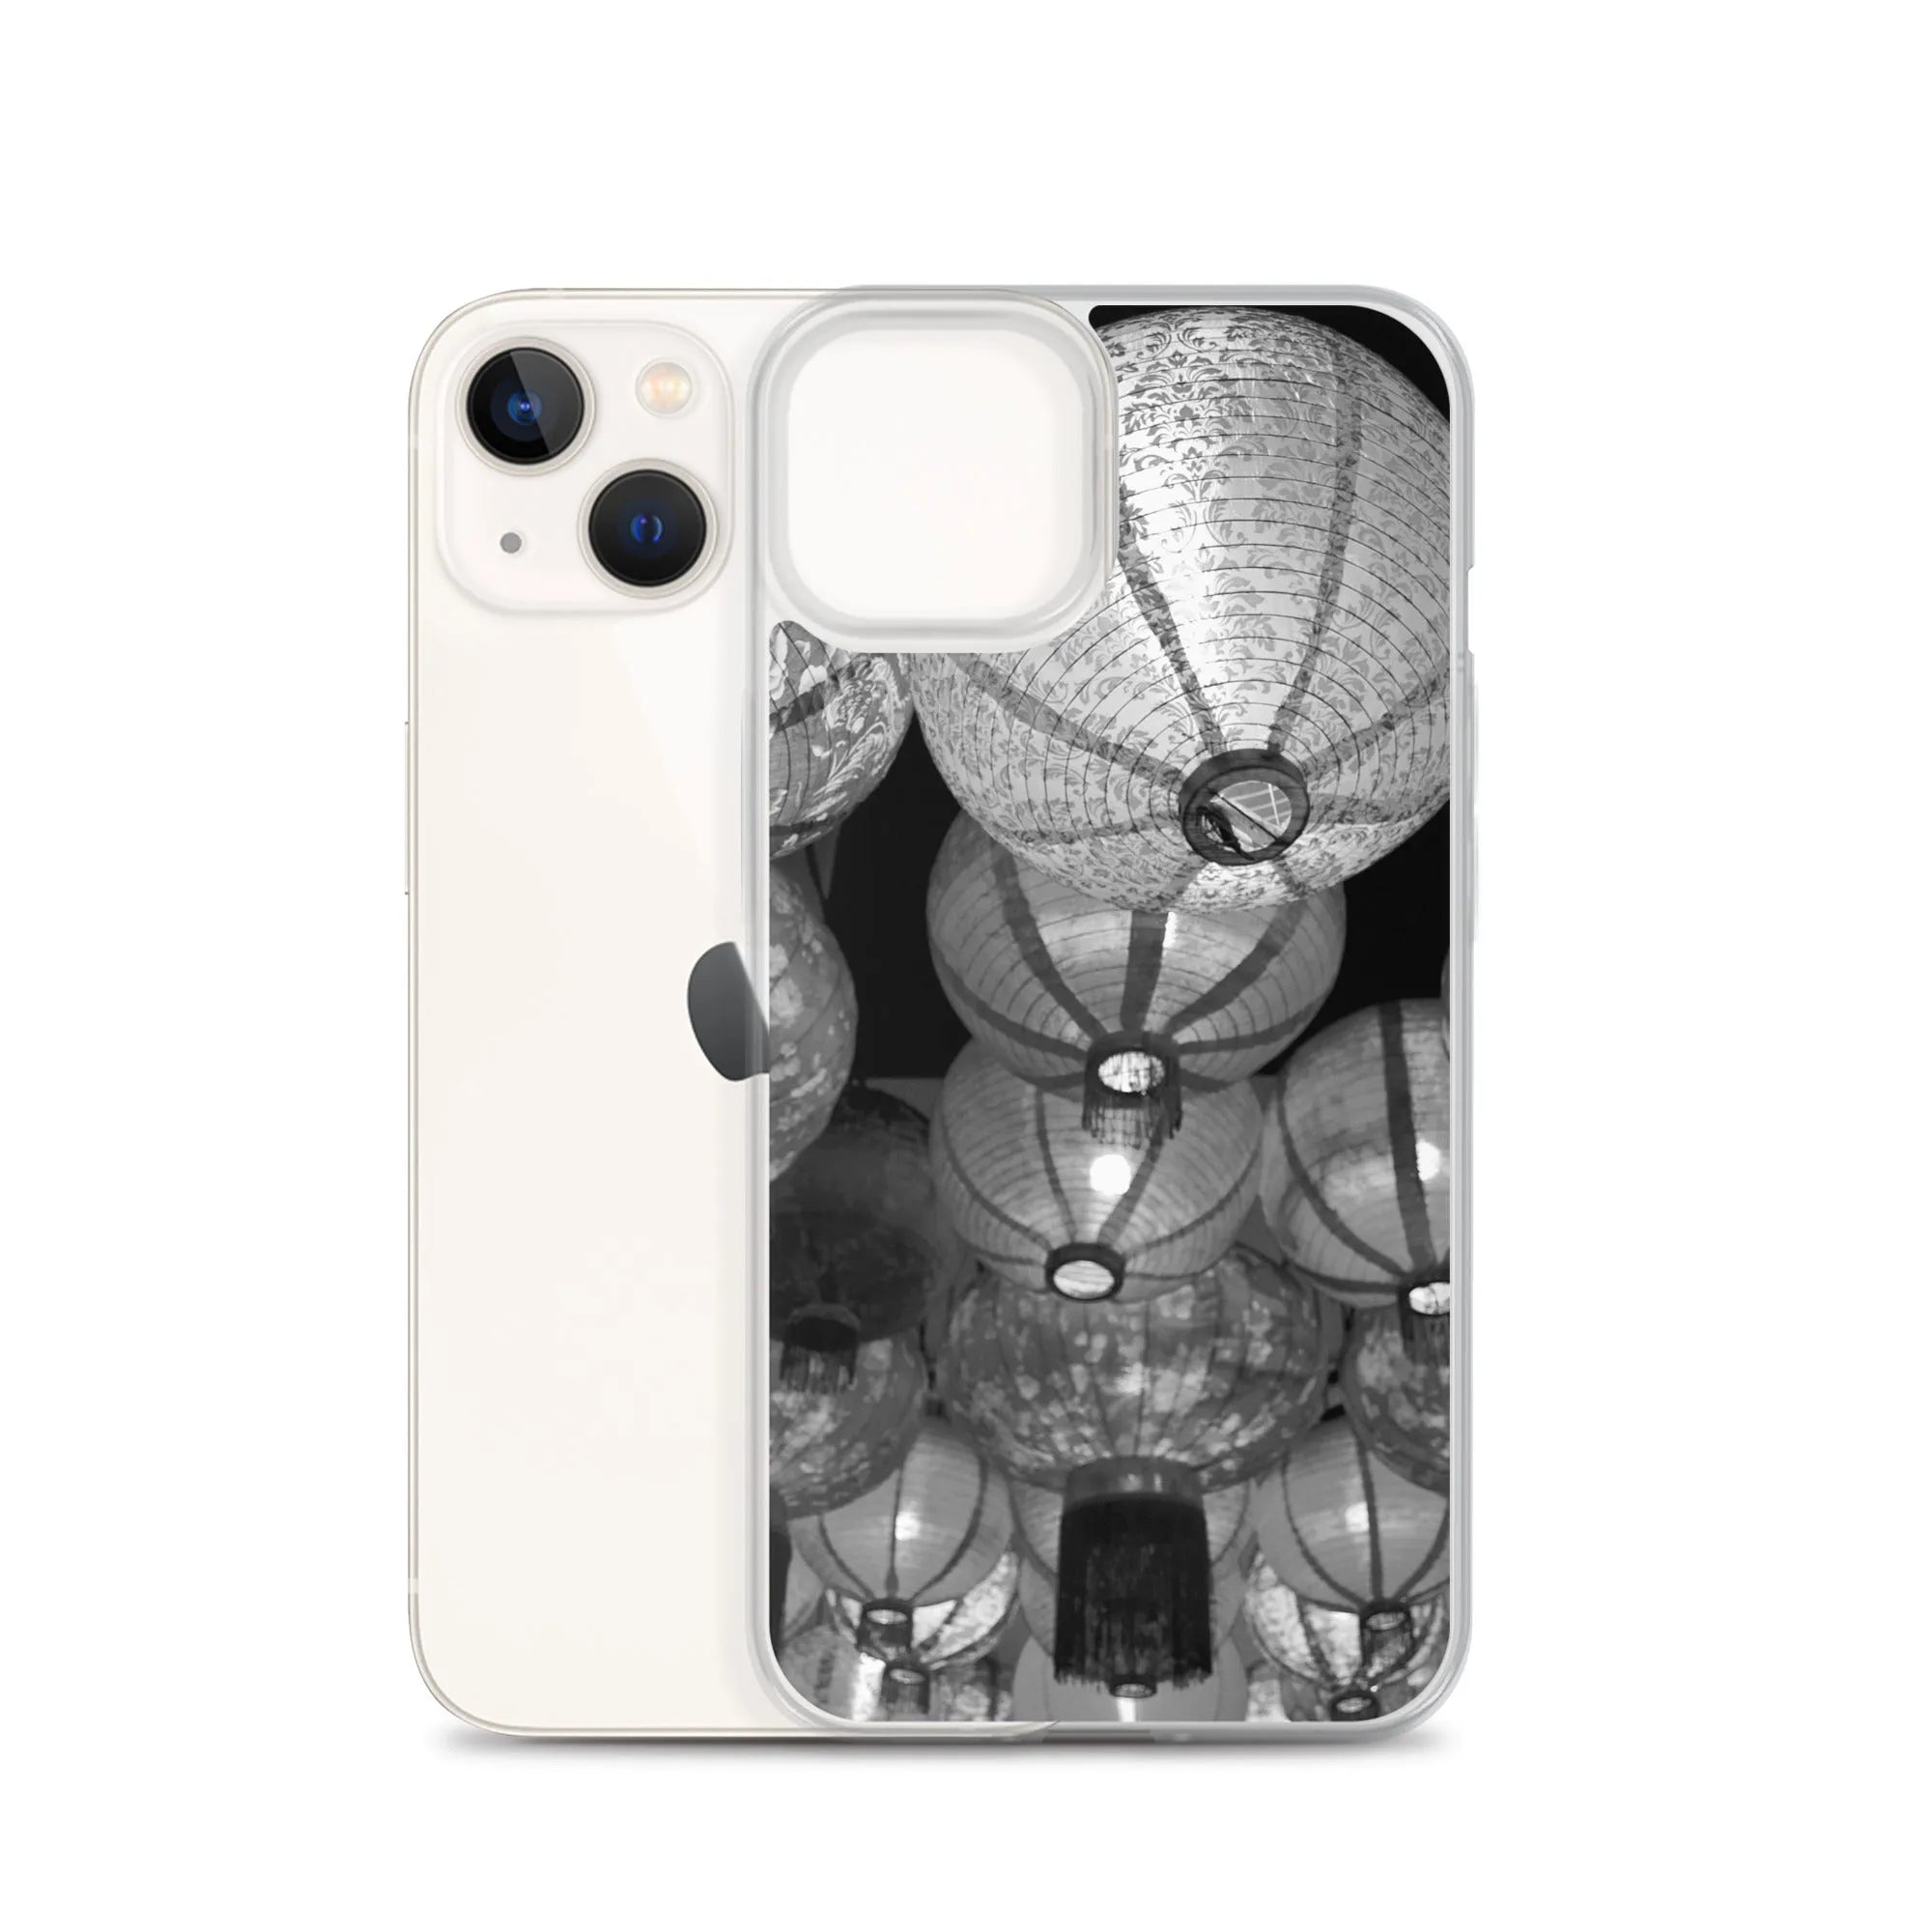 Raise The Red Lanterns - Designer Travels Art Iphone Case - Black And White - Iphone 13 - Mobile Phone Cases